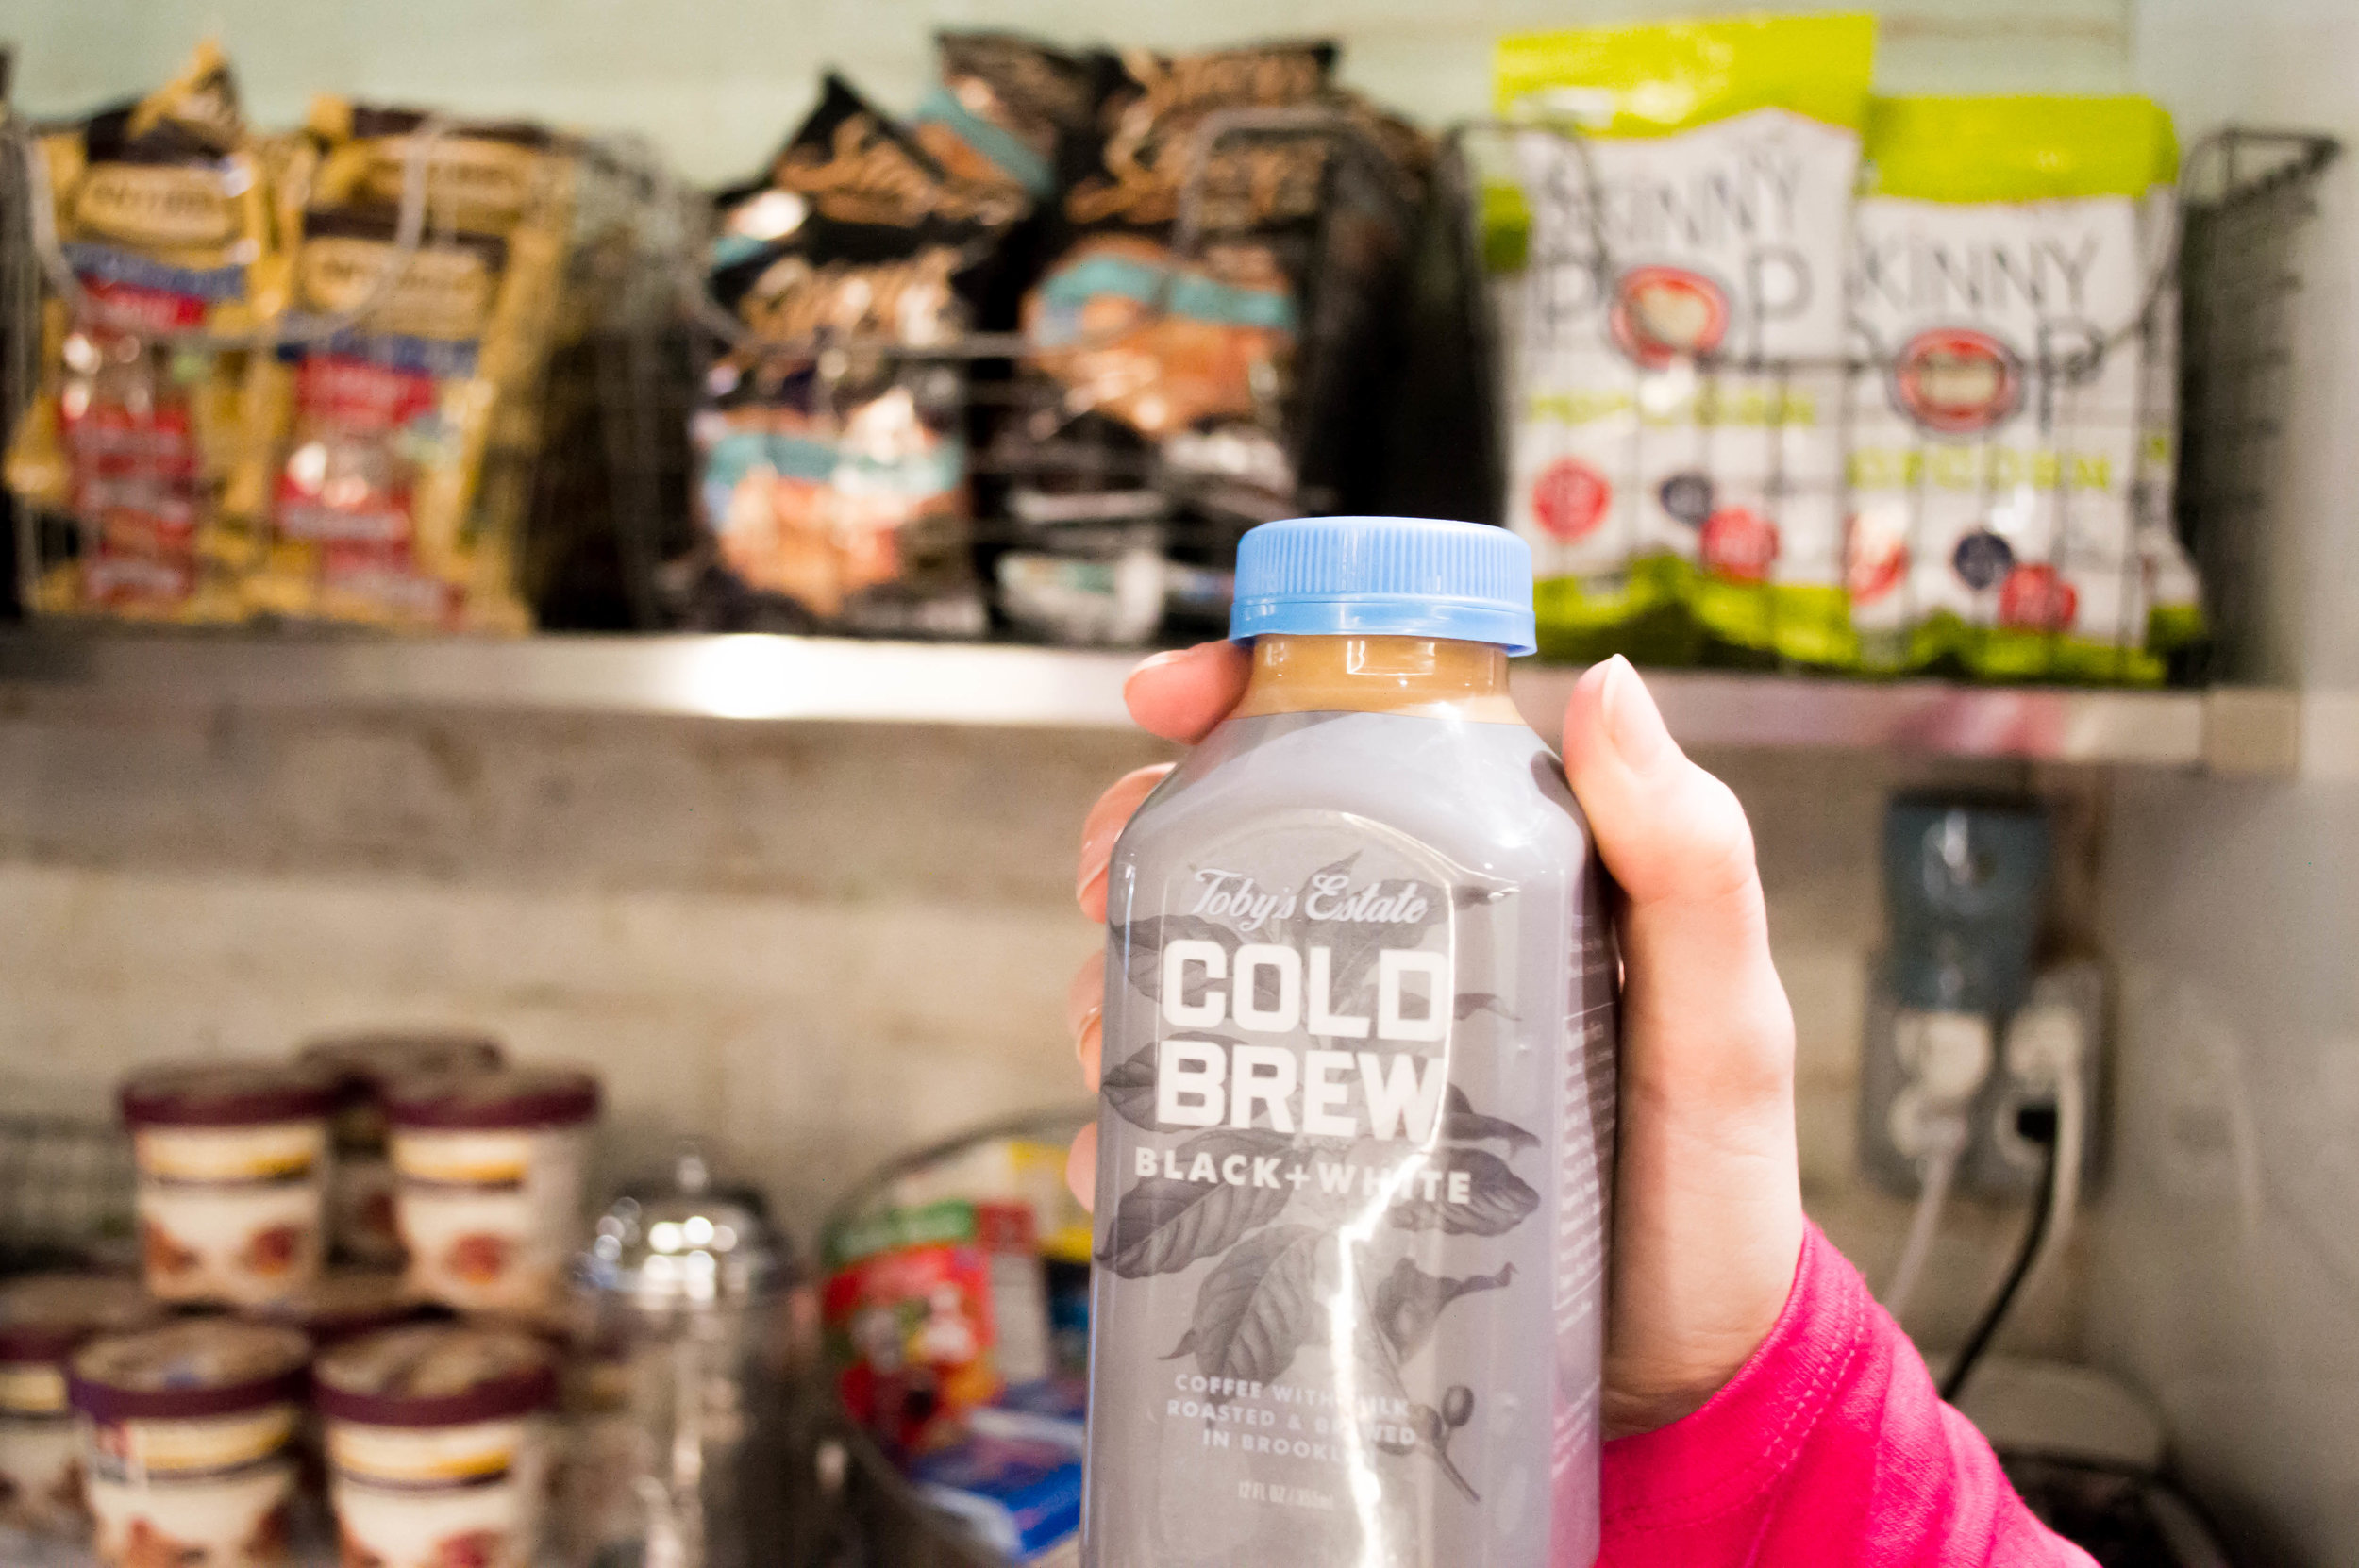 Bottle of cold brew coffee being held up in front of shelves of snacks